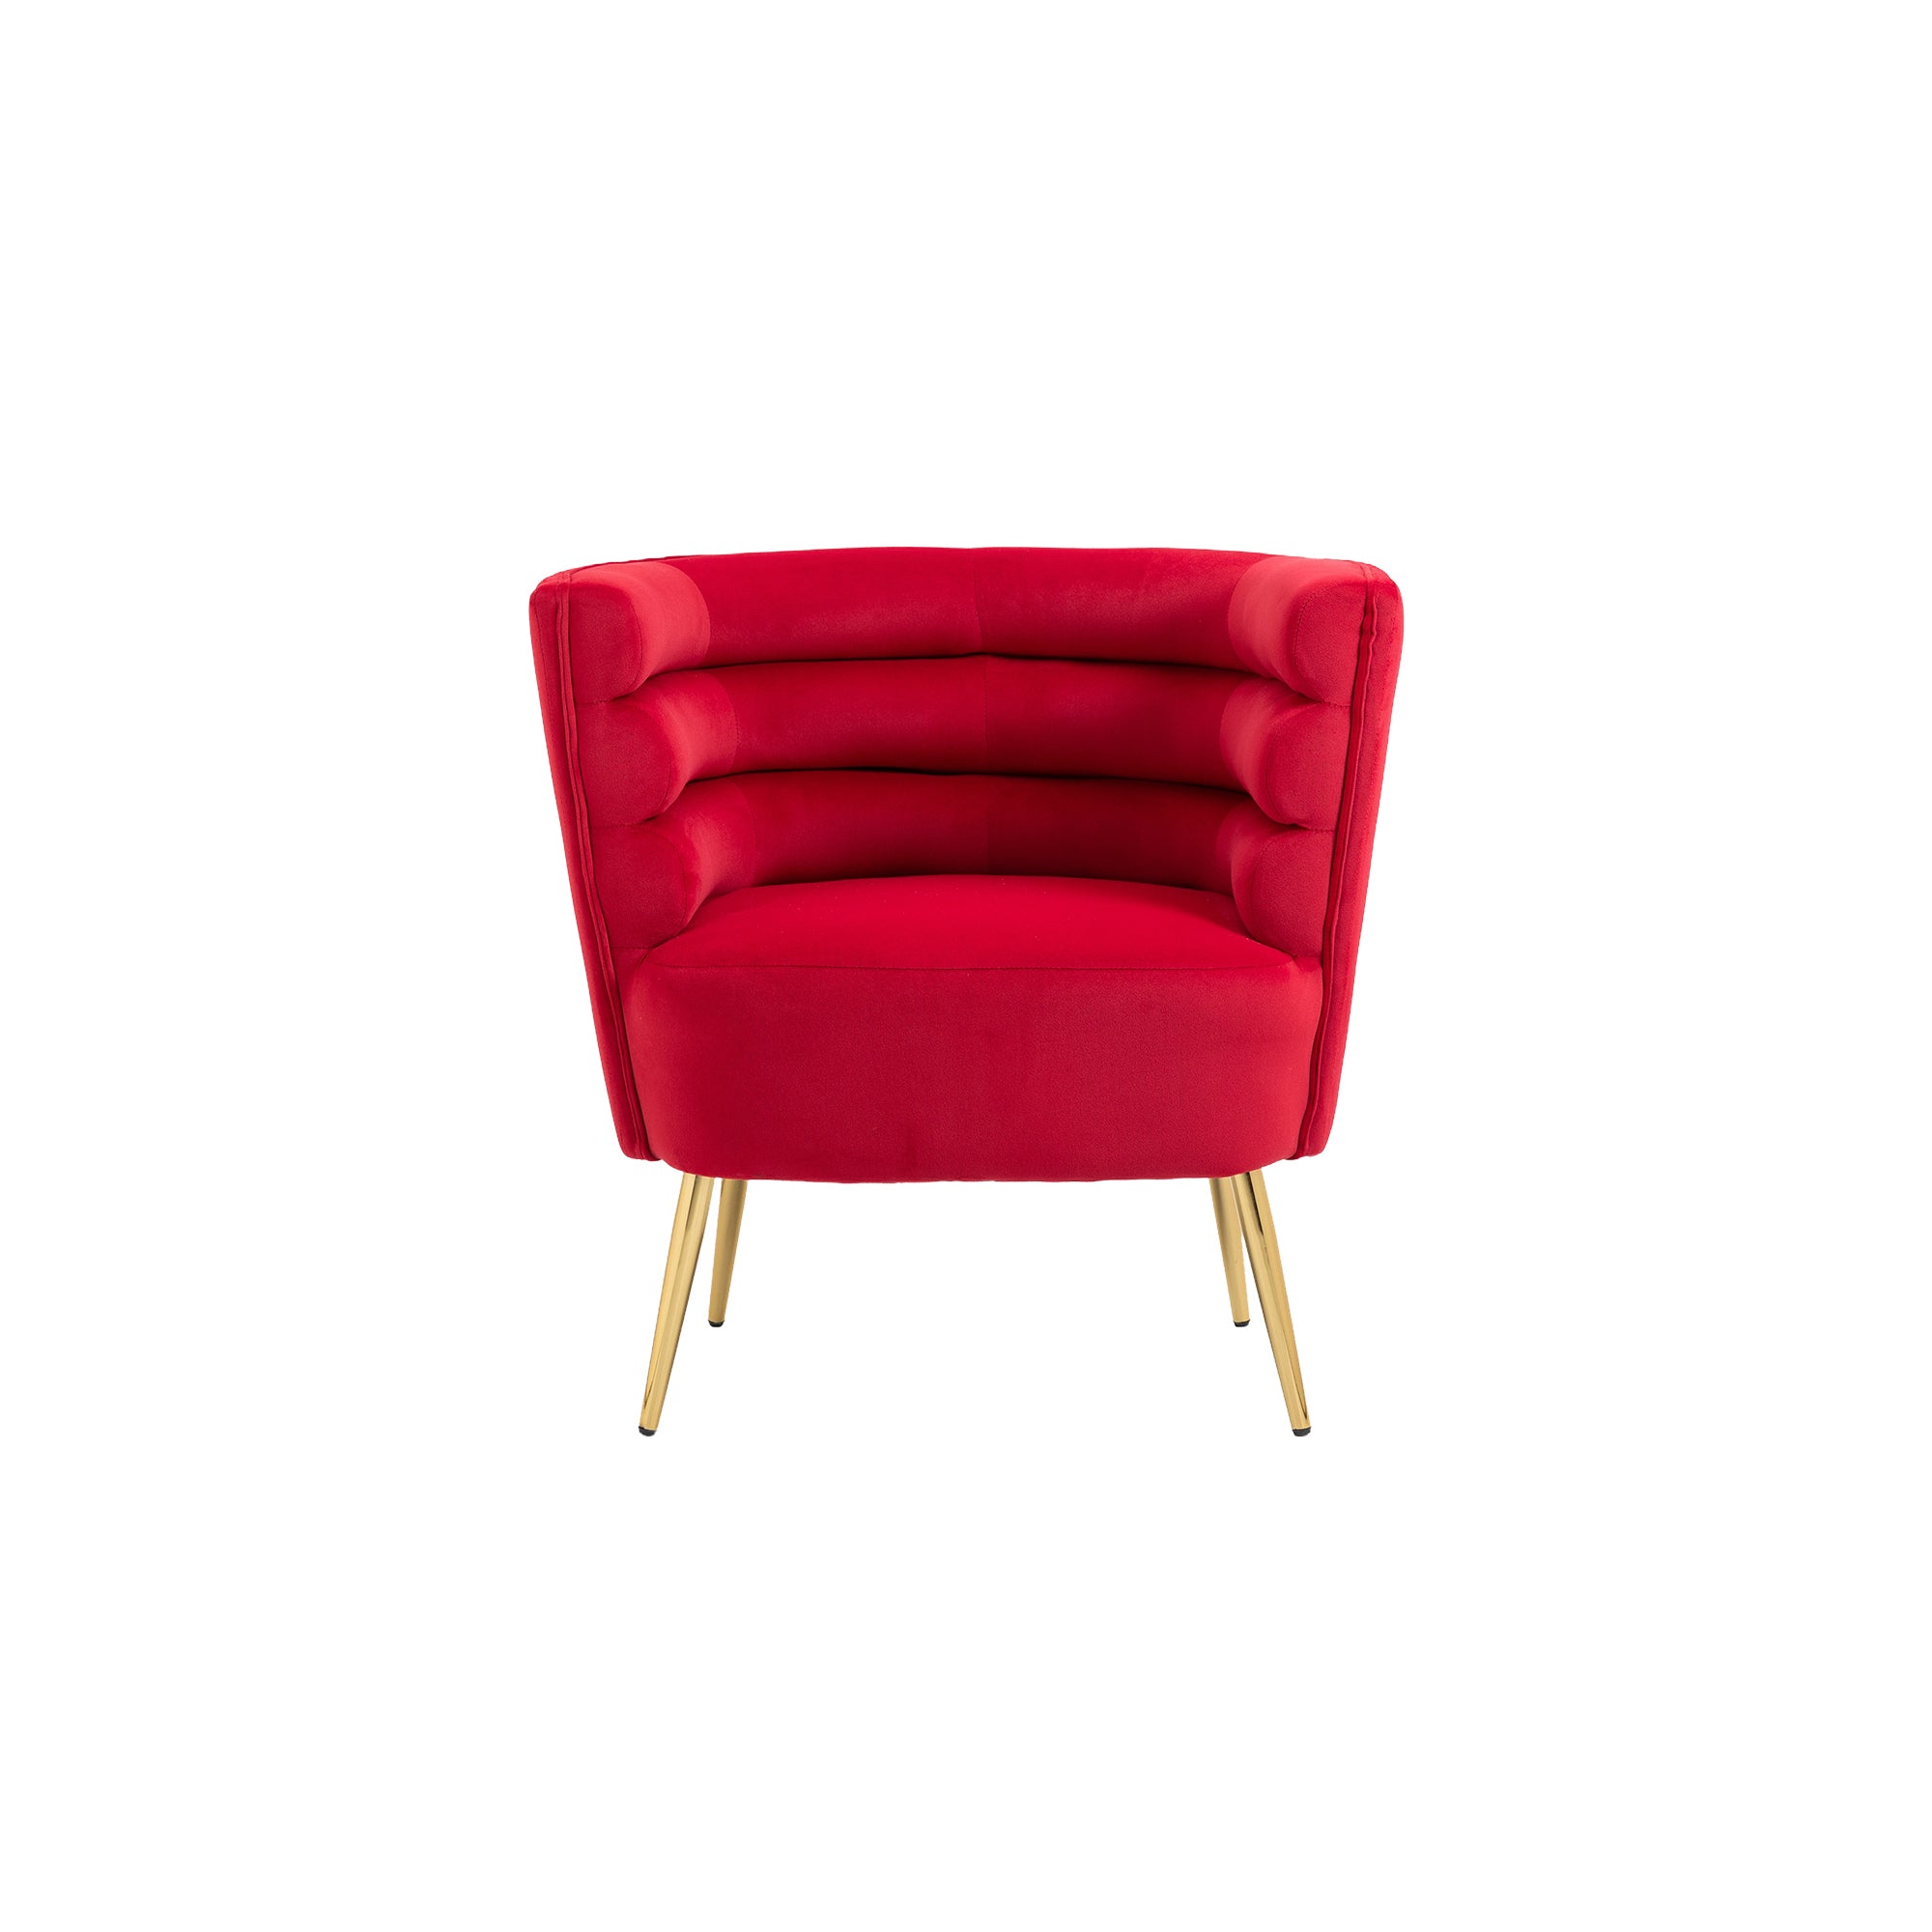 COOLMORE Accent Chair ,leisure single chair with red-velvet